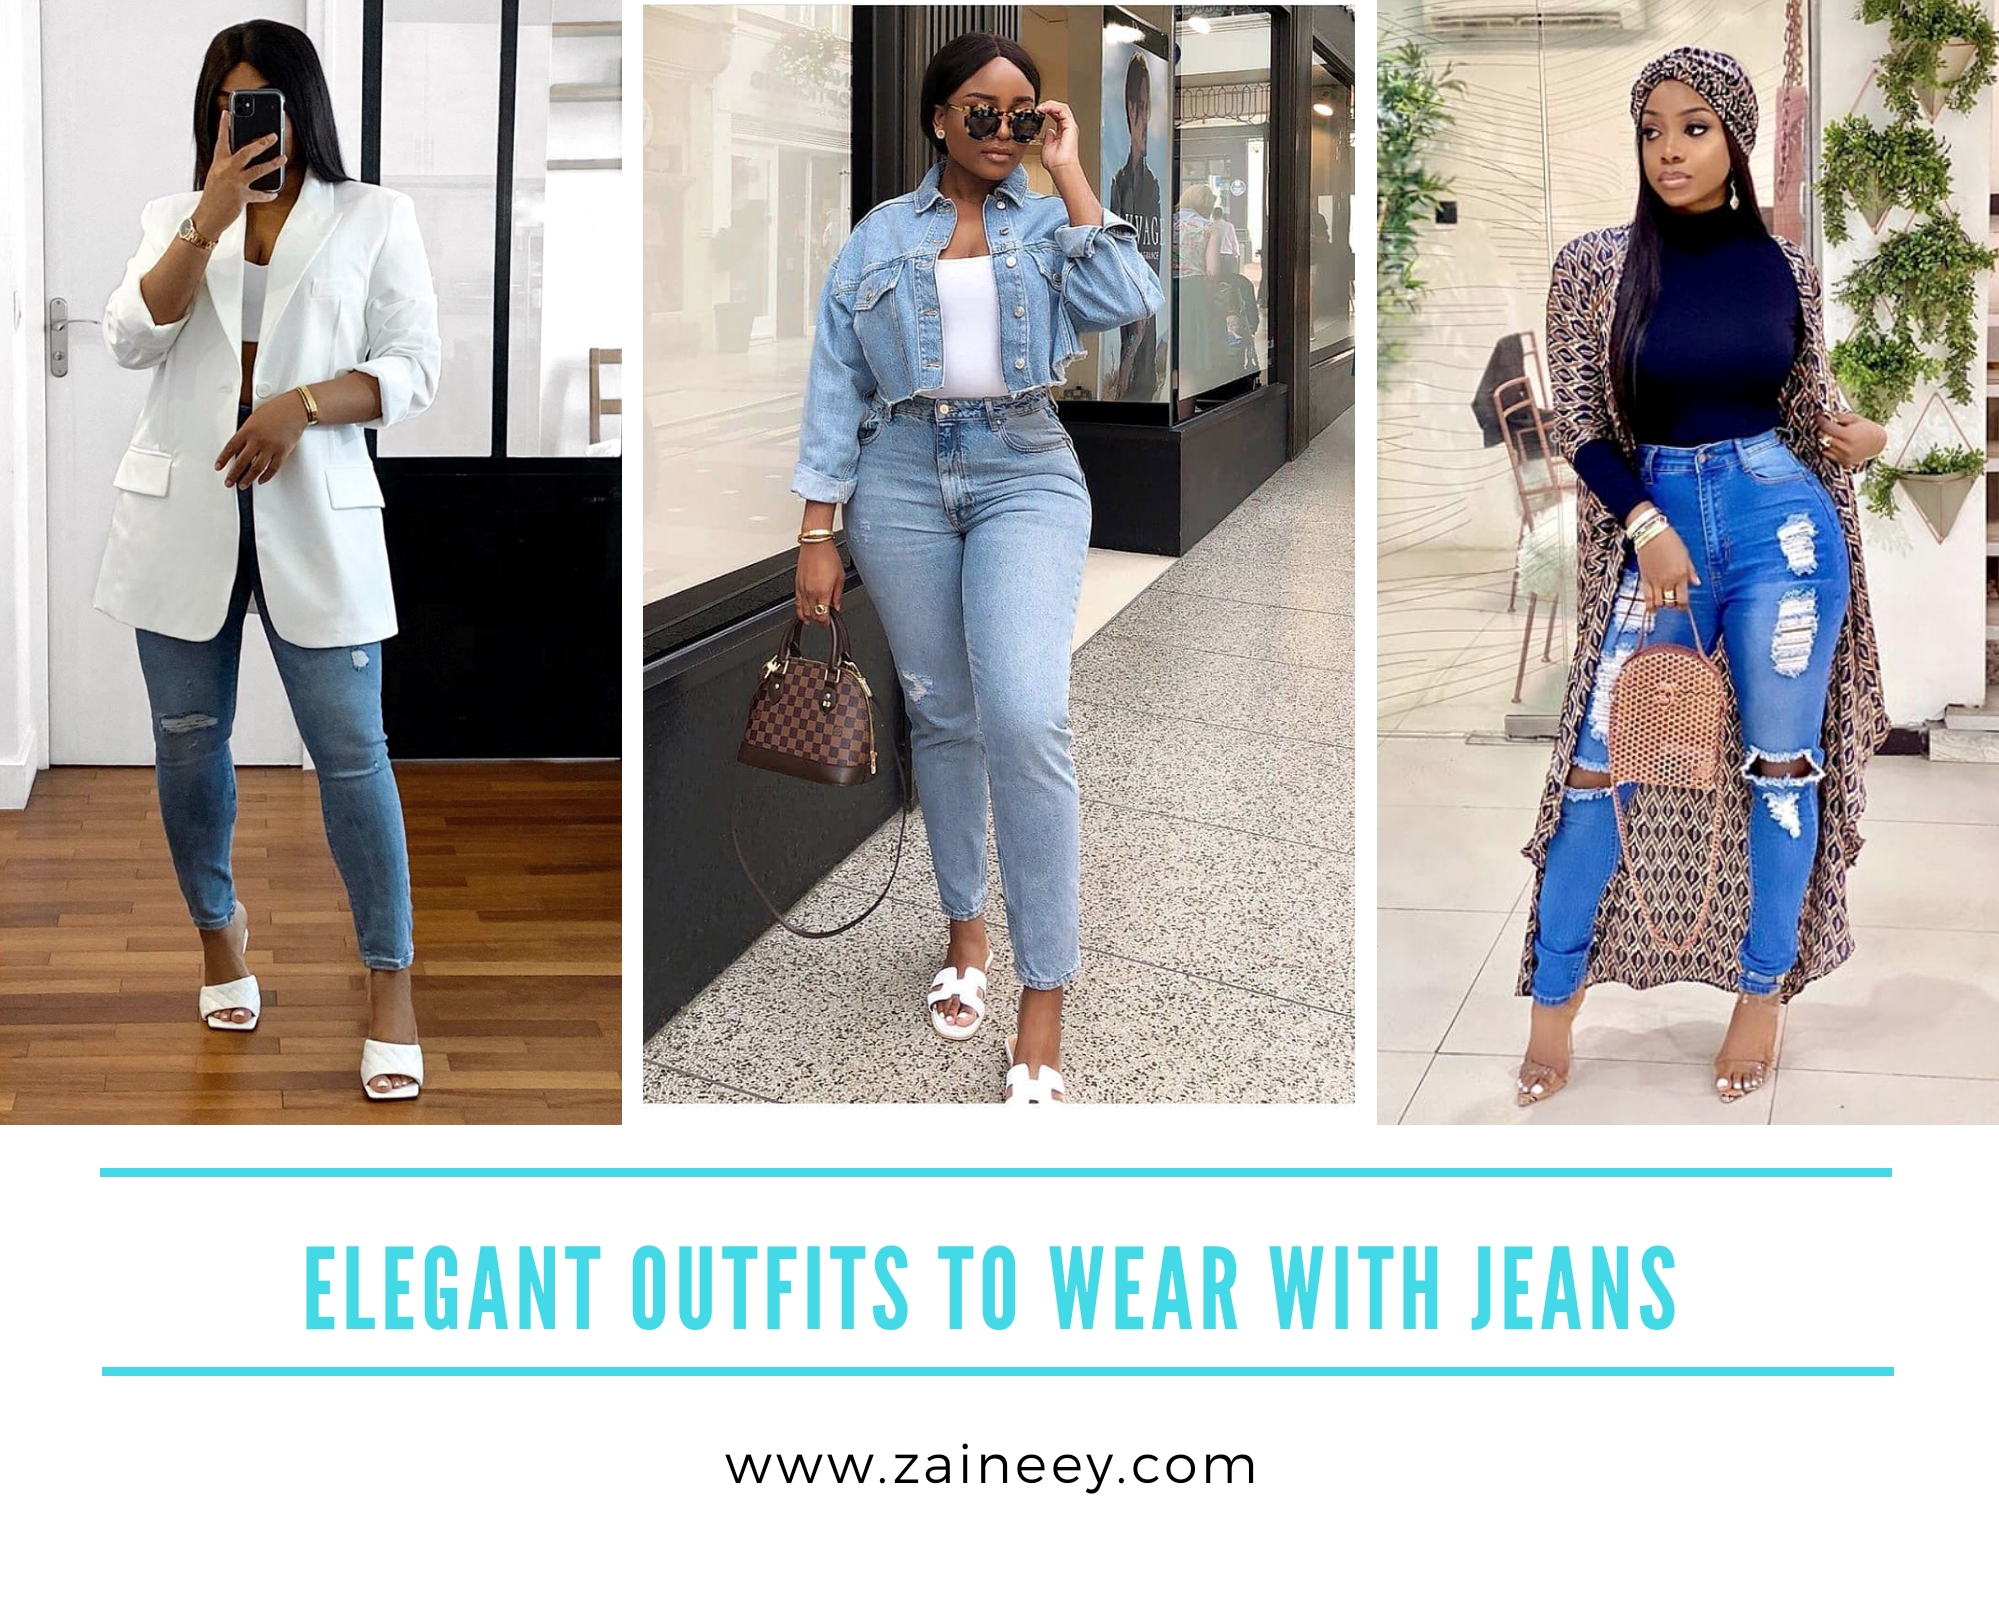 Simple, Classic and Elegant Outfits/Tops to wear with jeans